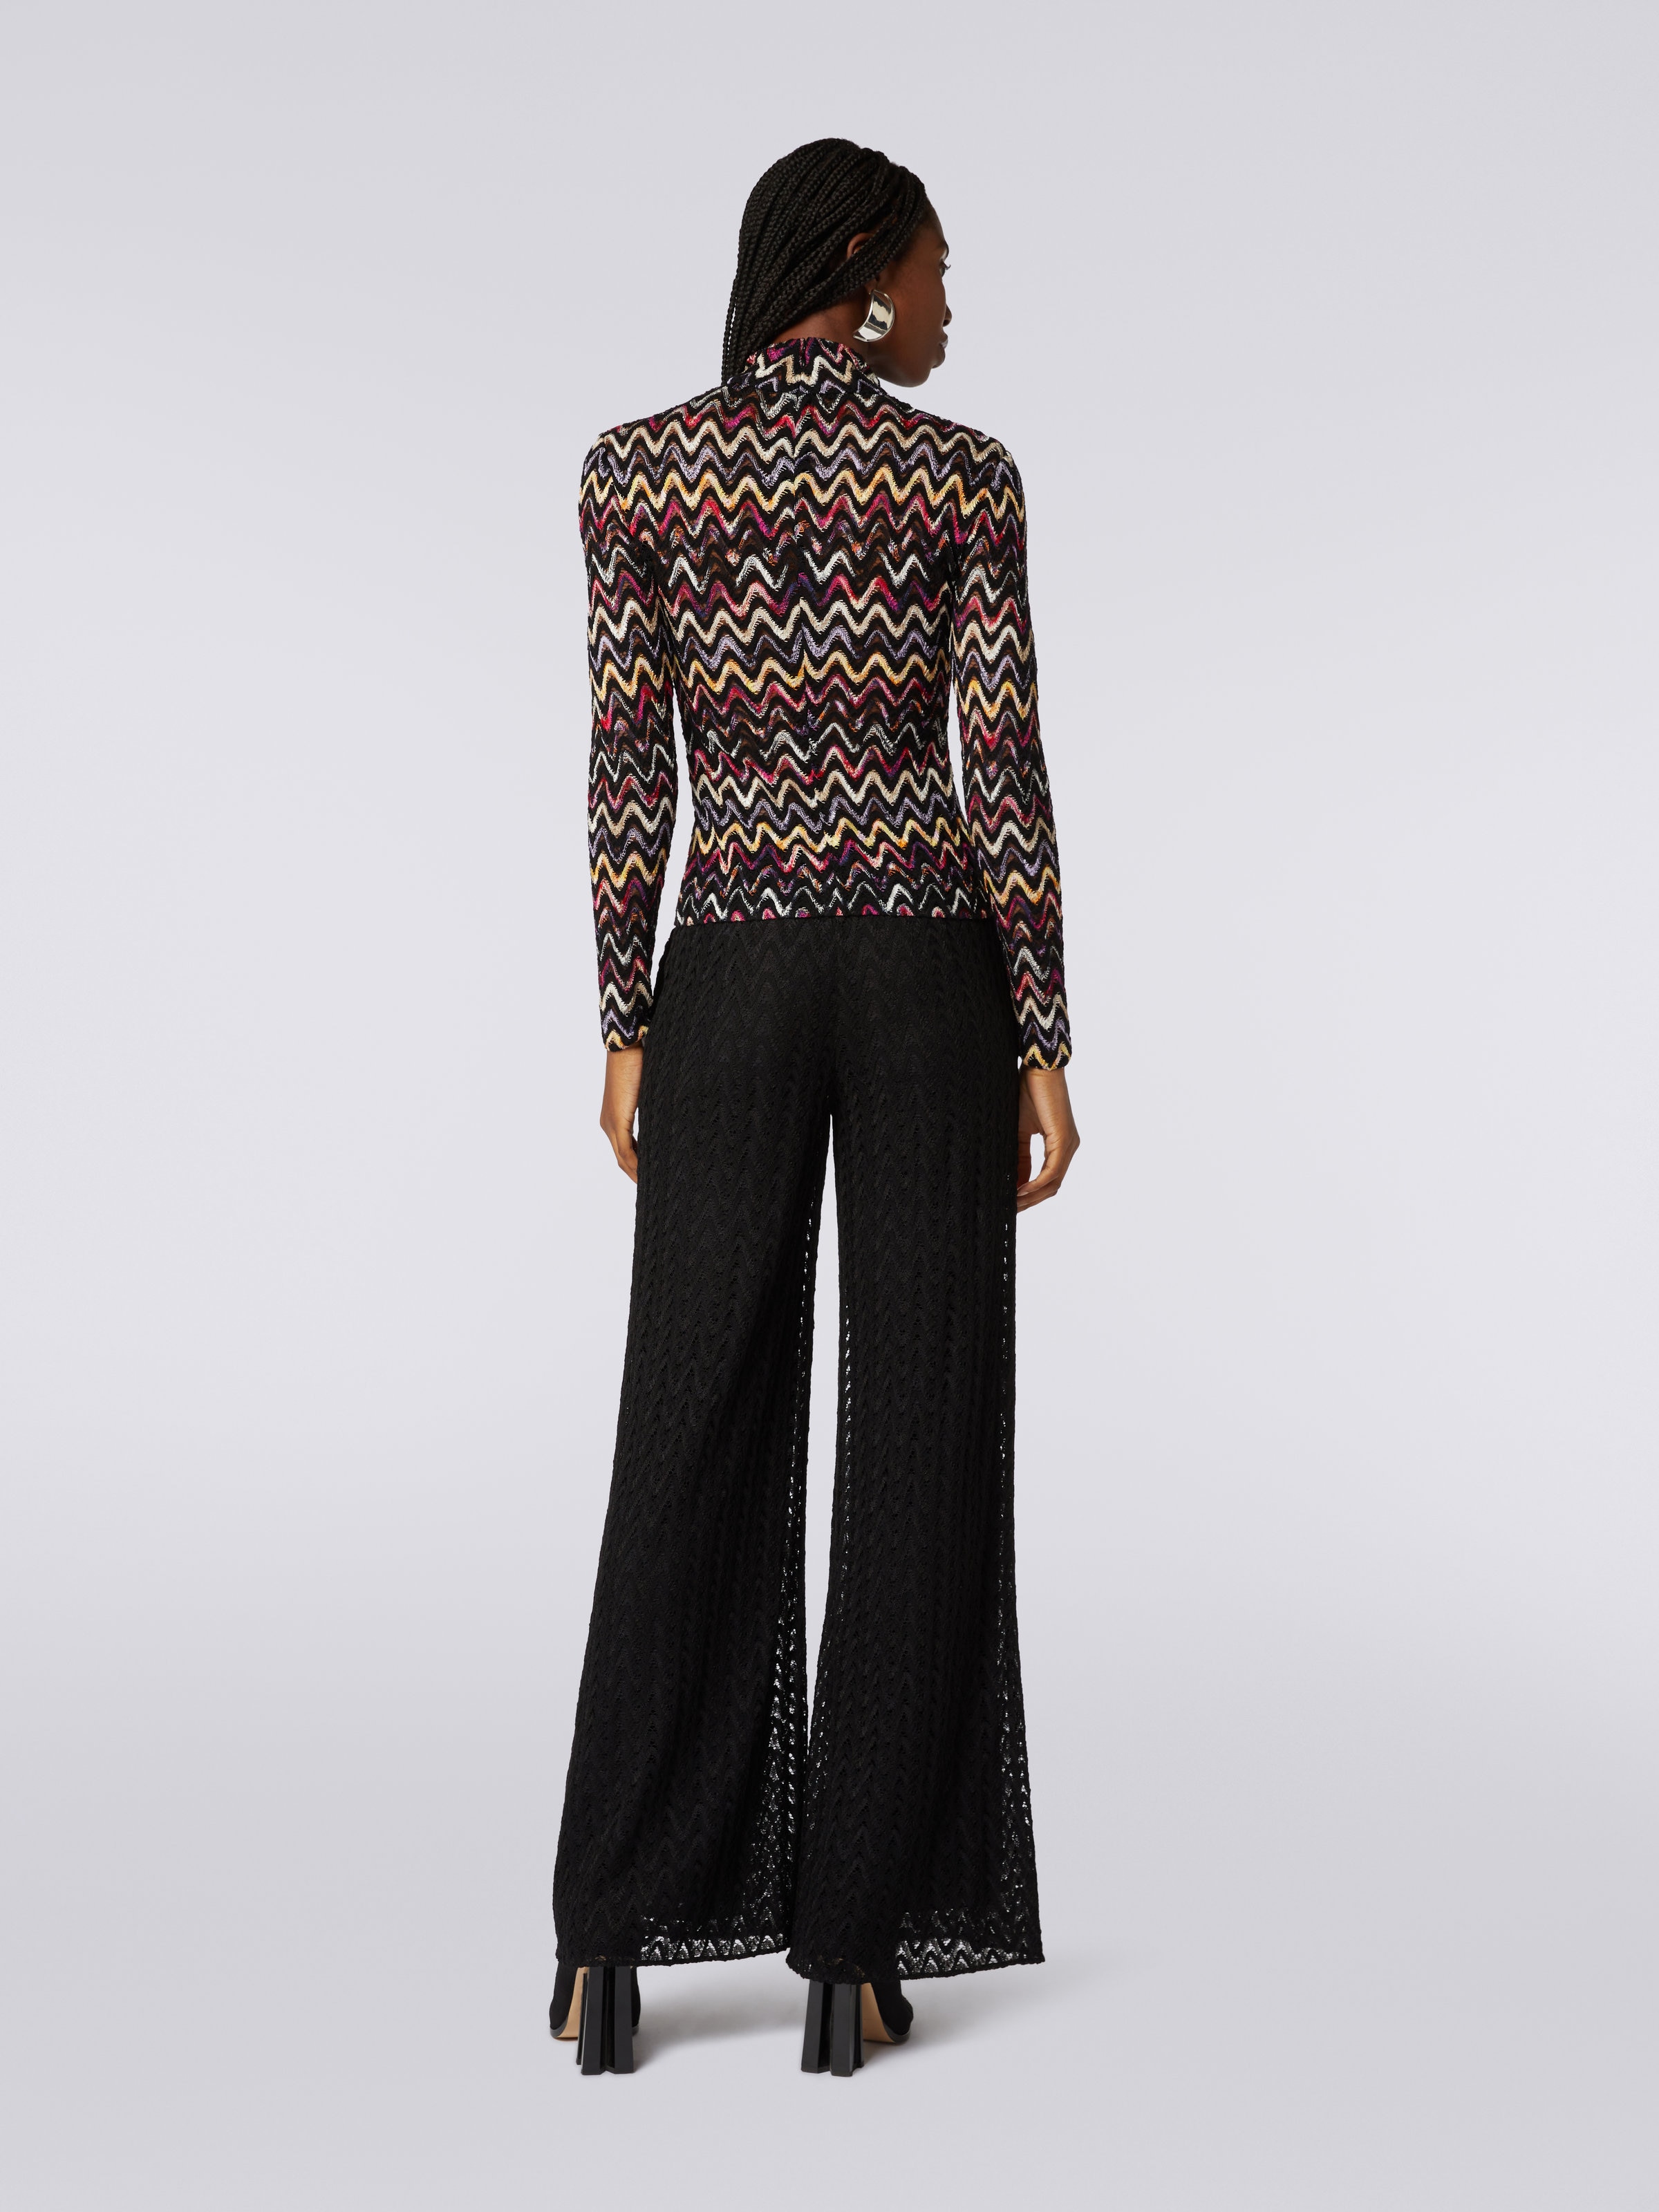 Palazzo pants in raschel knit wool and viscose, Black    - 3